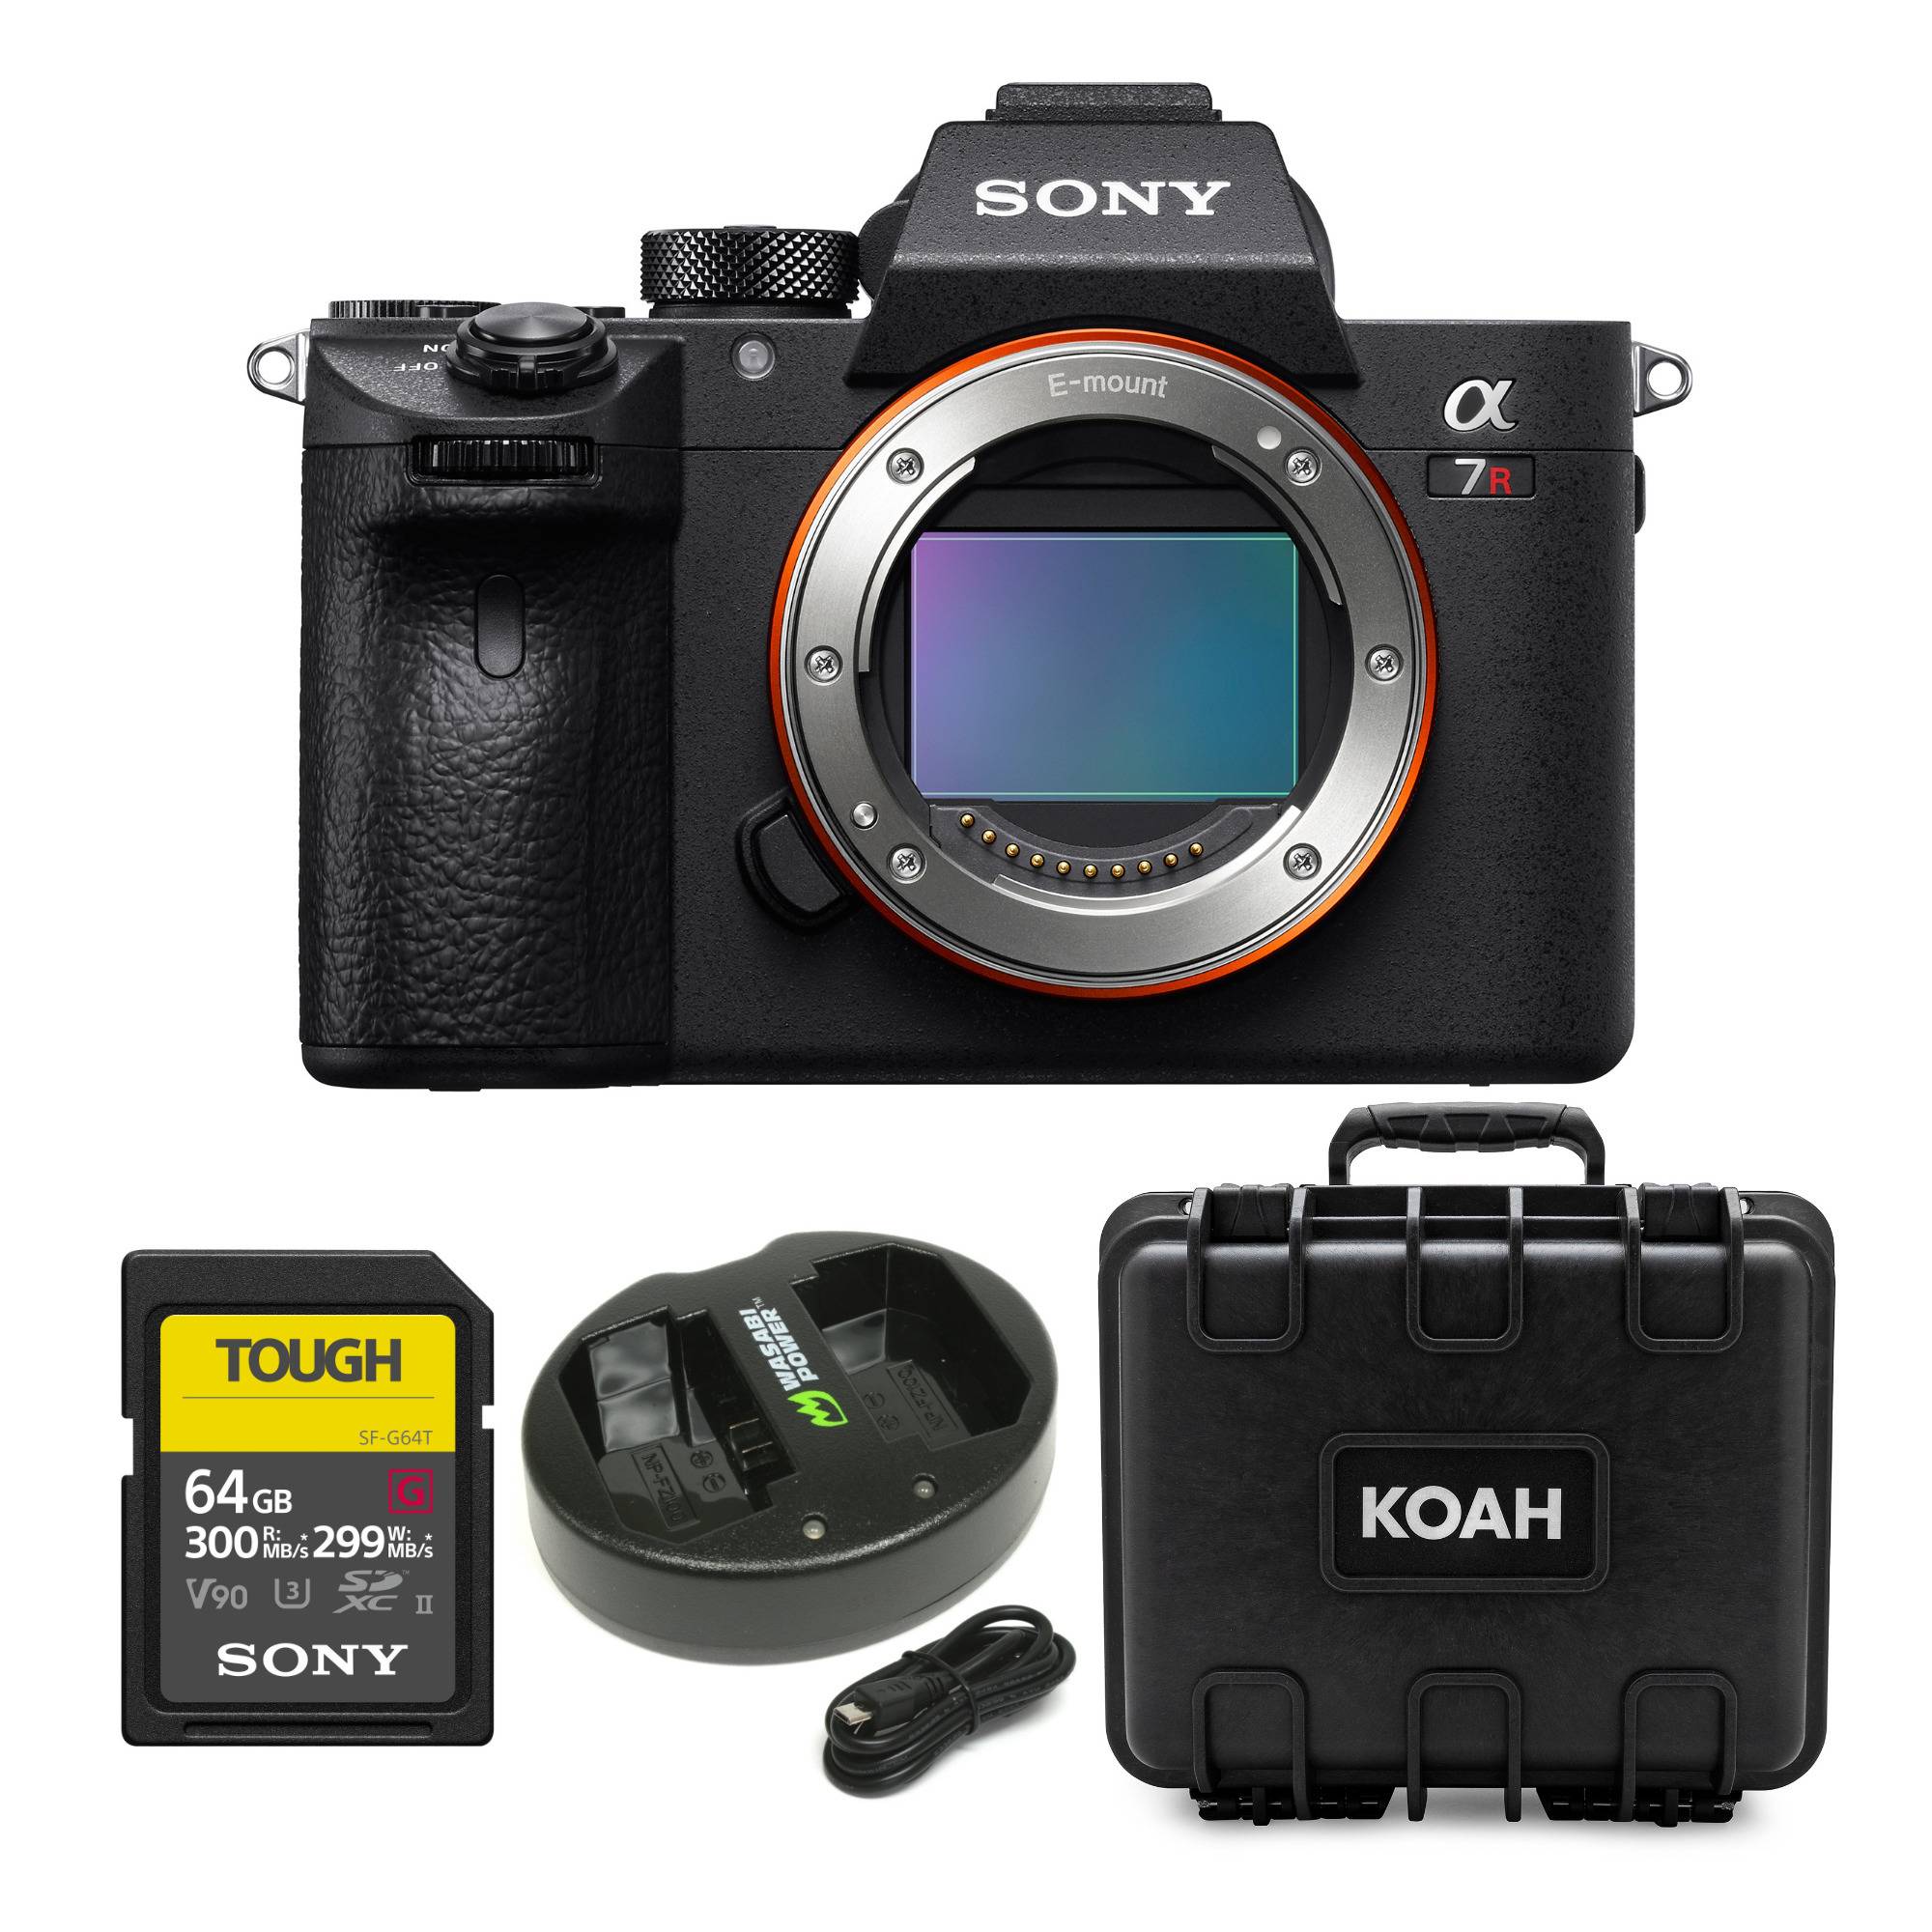 Sony Alpha a7R III A Full-Frame Mirrorless Camera Body with 64GB SD Card and Accessory Bundle